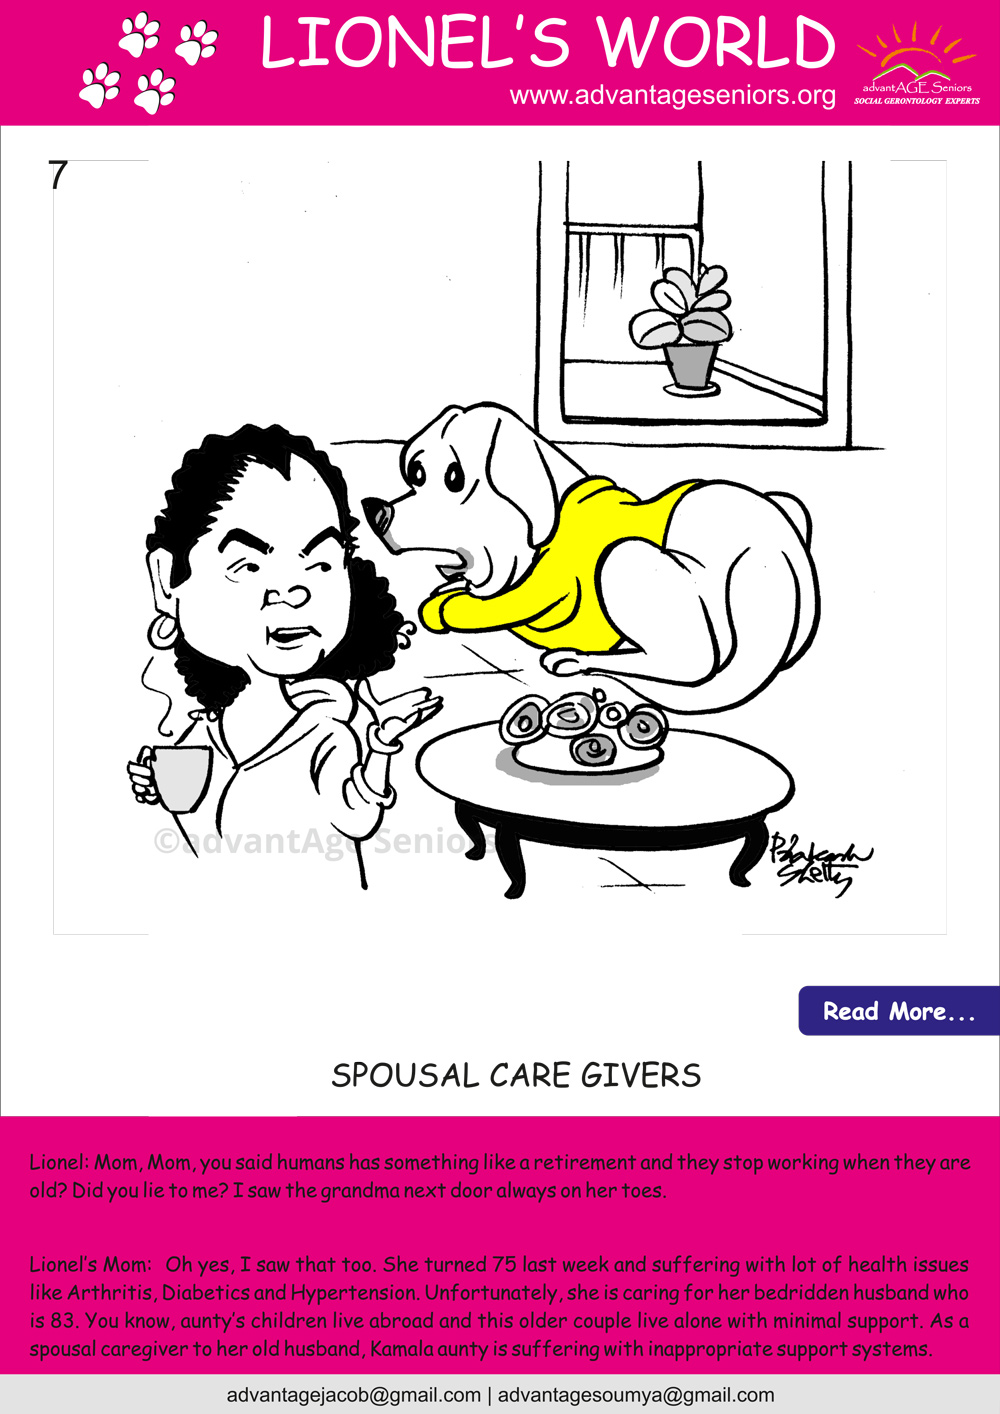 Spousal Care Givers - Elder Care Experts